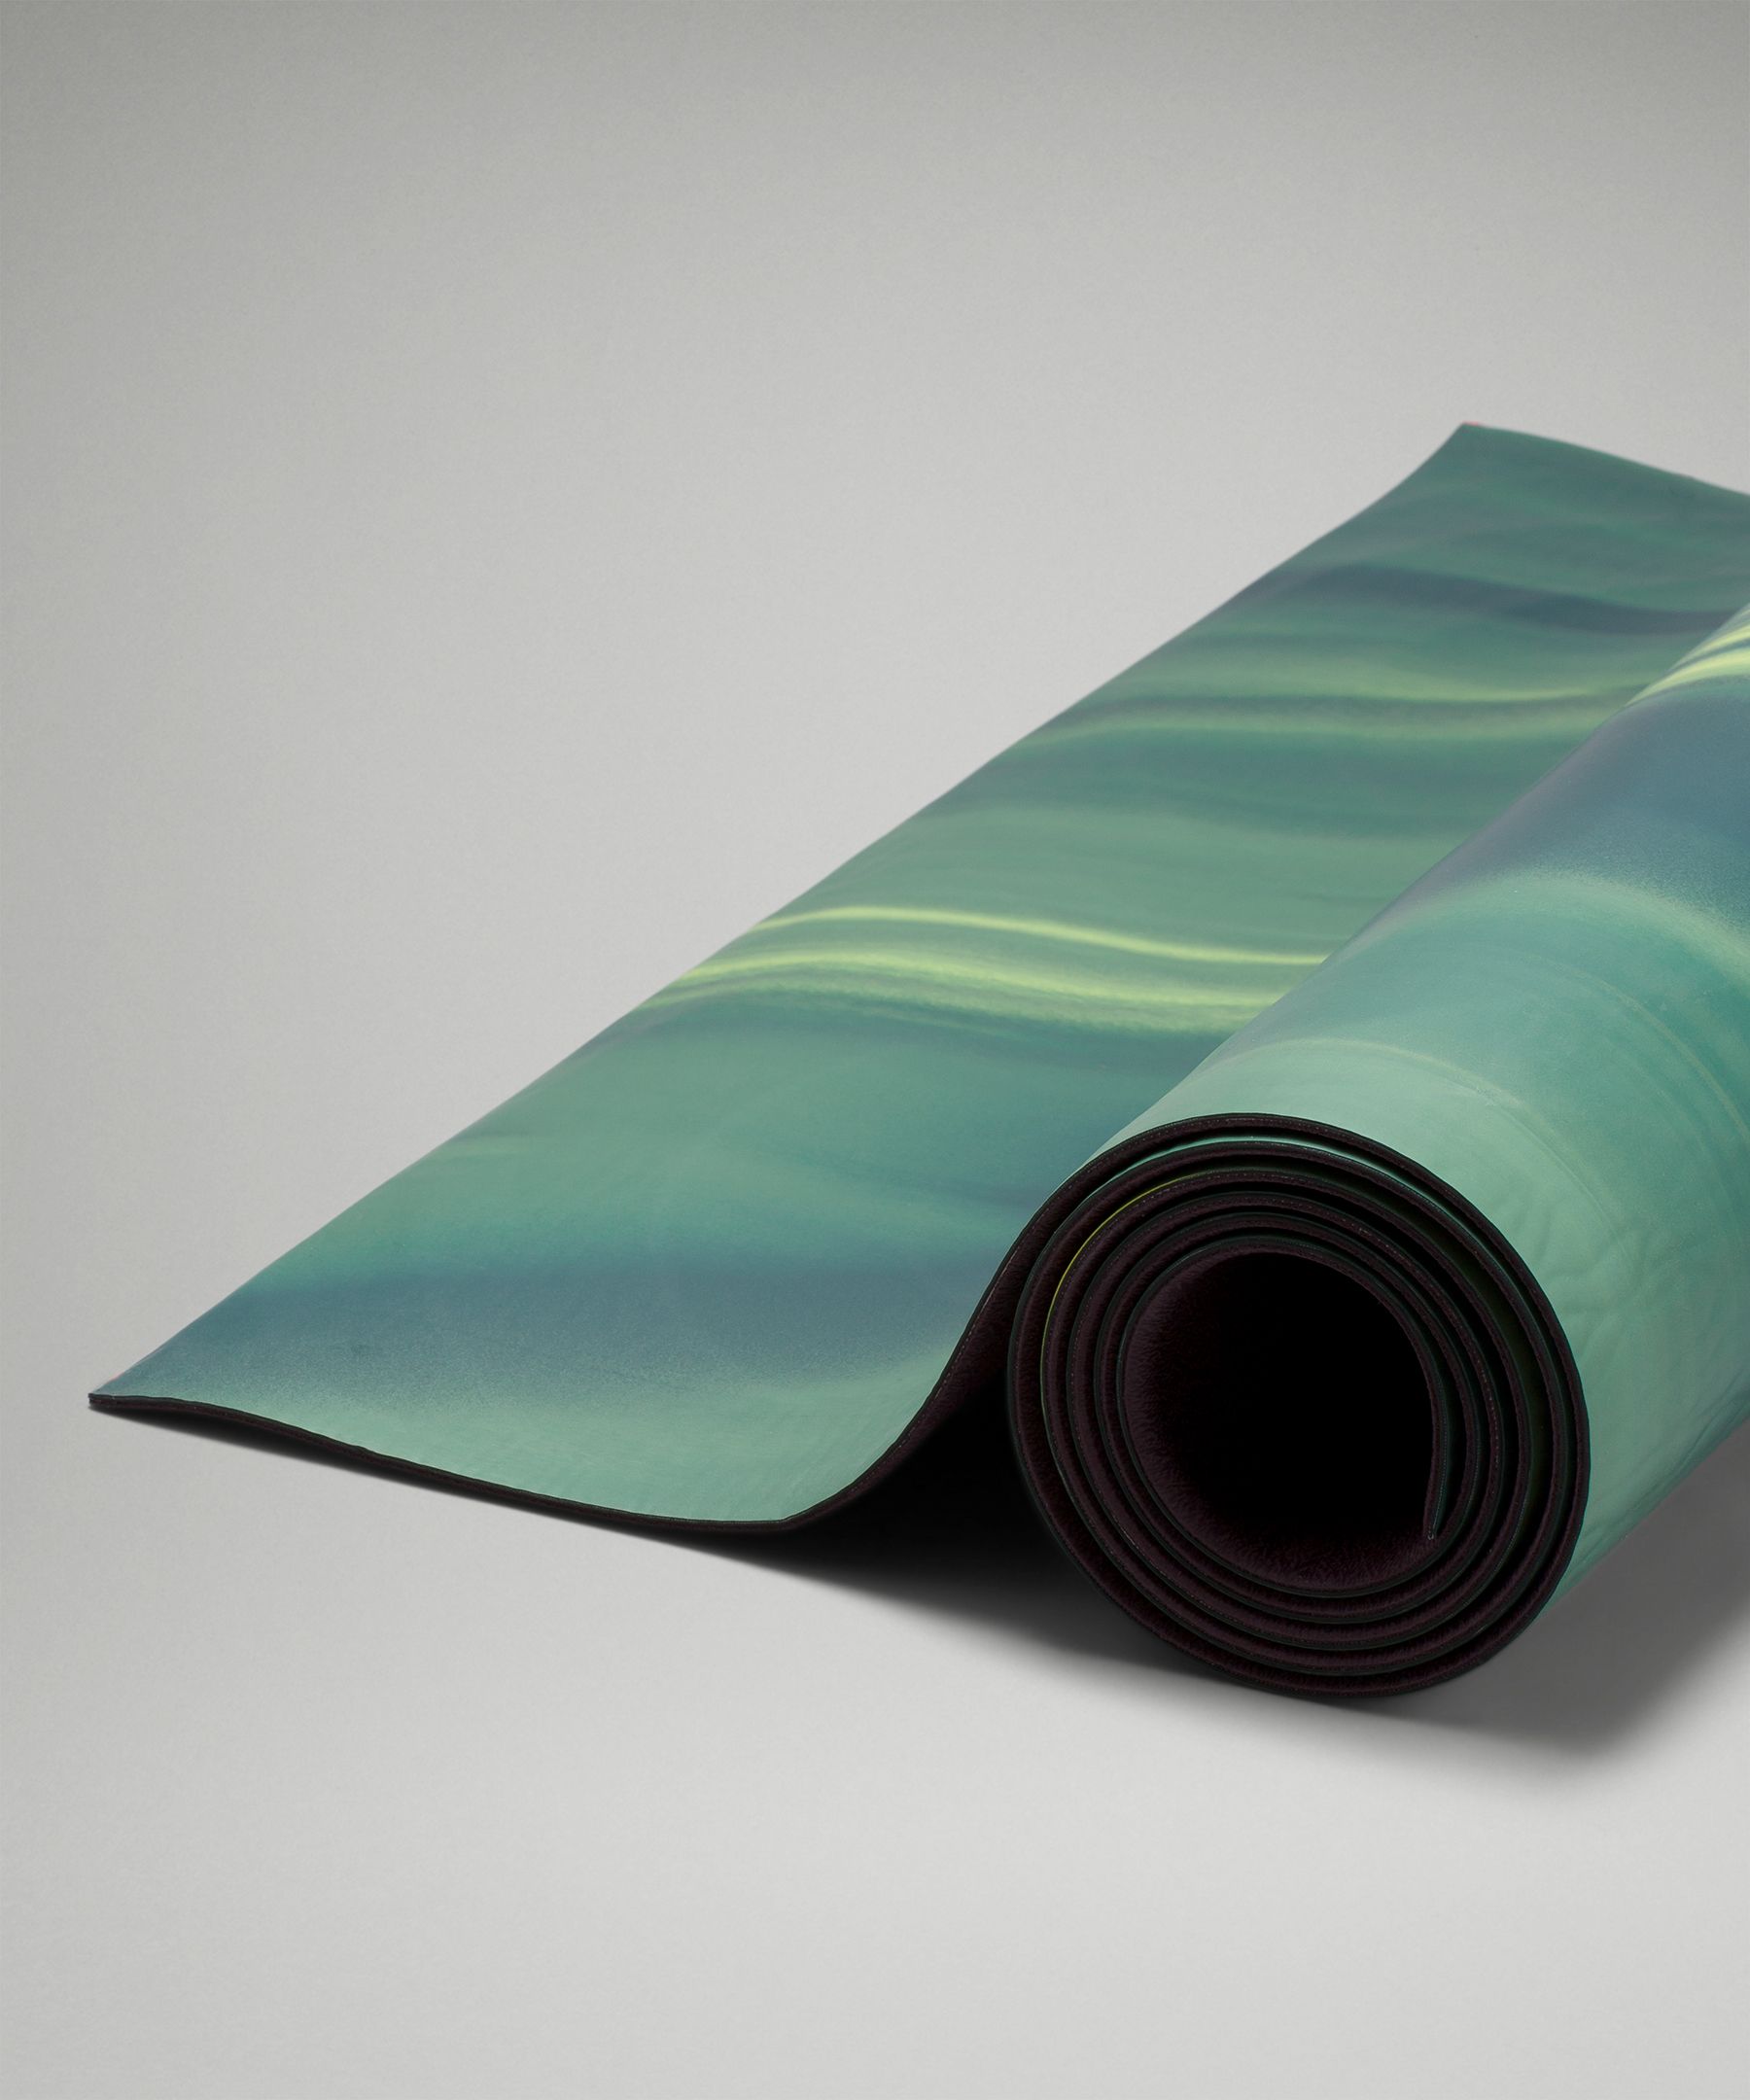 Take Form Yoga Mat 5mm Made With FSC™ Certified Rubber, Unisex Mats